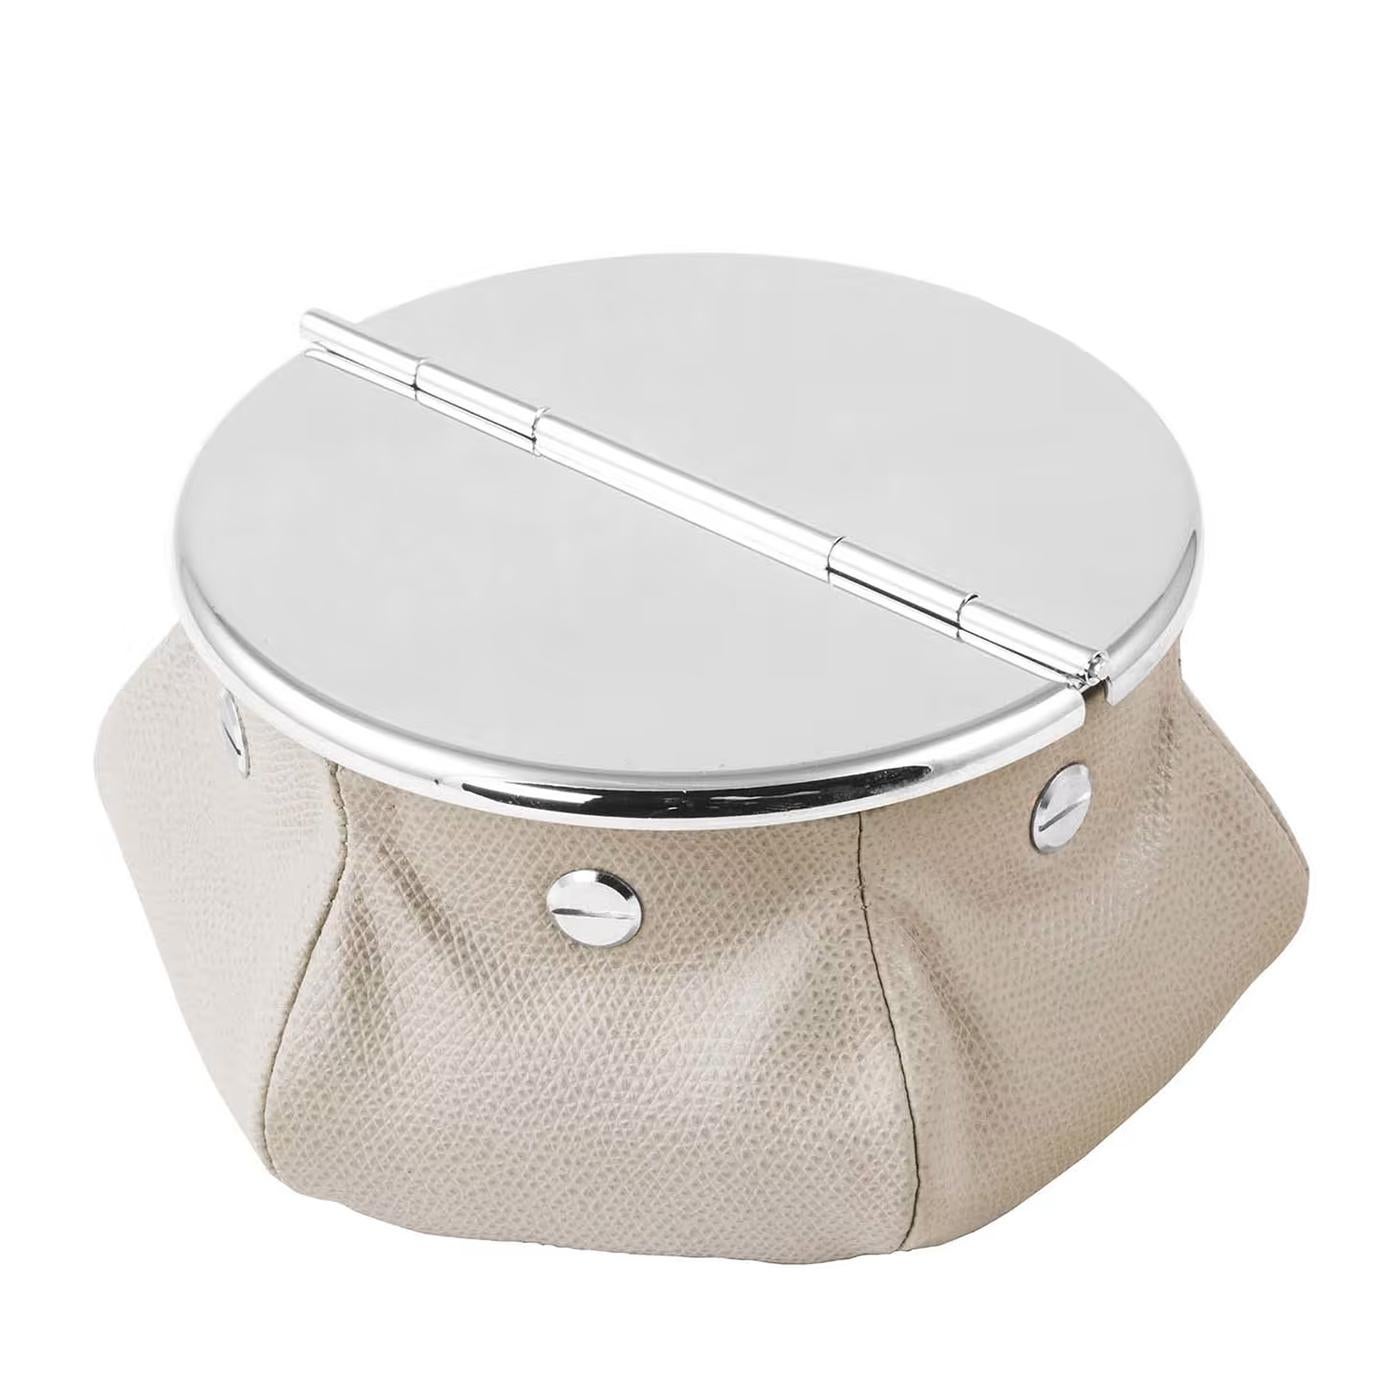 Ashtray White Calfskin 2 Cigars Yachting with bag covered 
with white calfskin genuine leather in white color.
Bag filled with 1 kg micro metal balls that give high stability.
Ashtray top with 2 openable lids in solid brass in palladium
finish. With